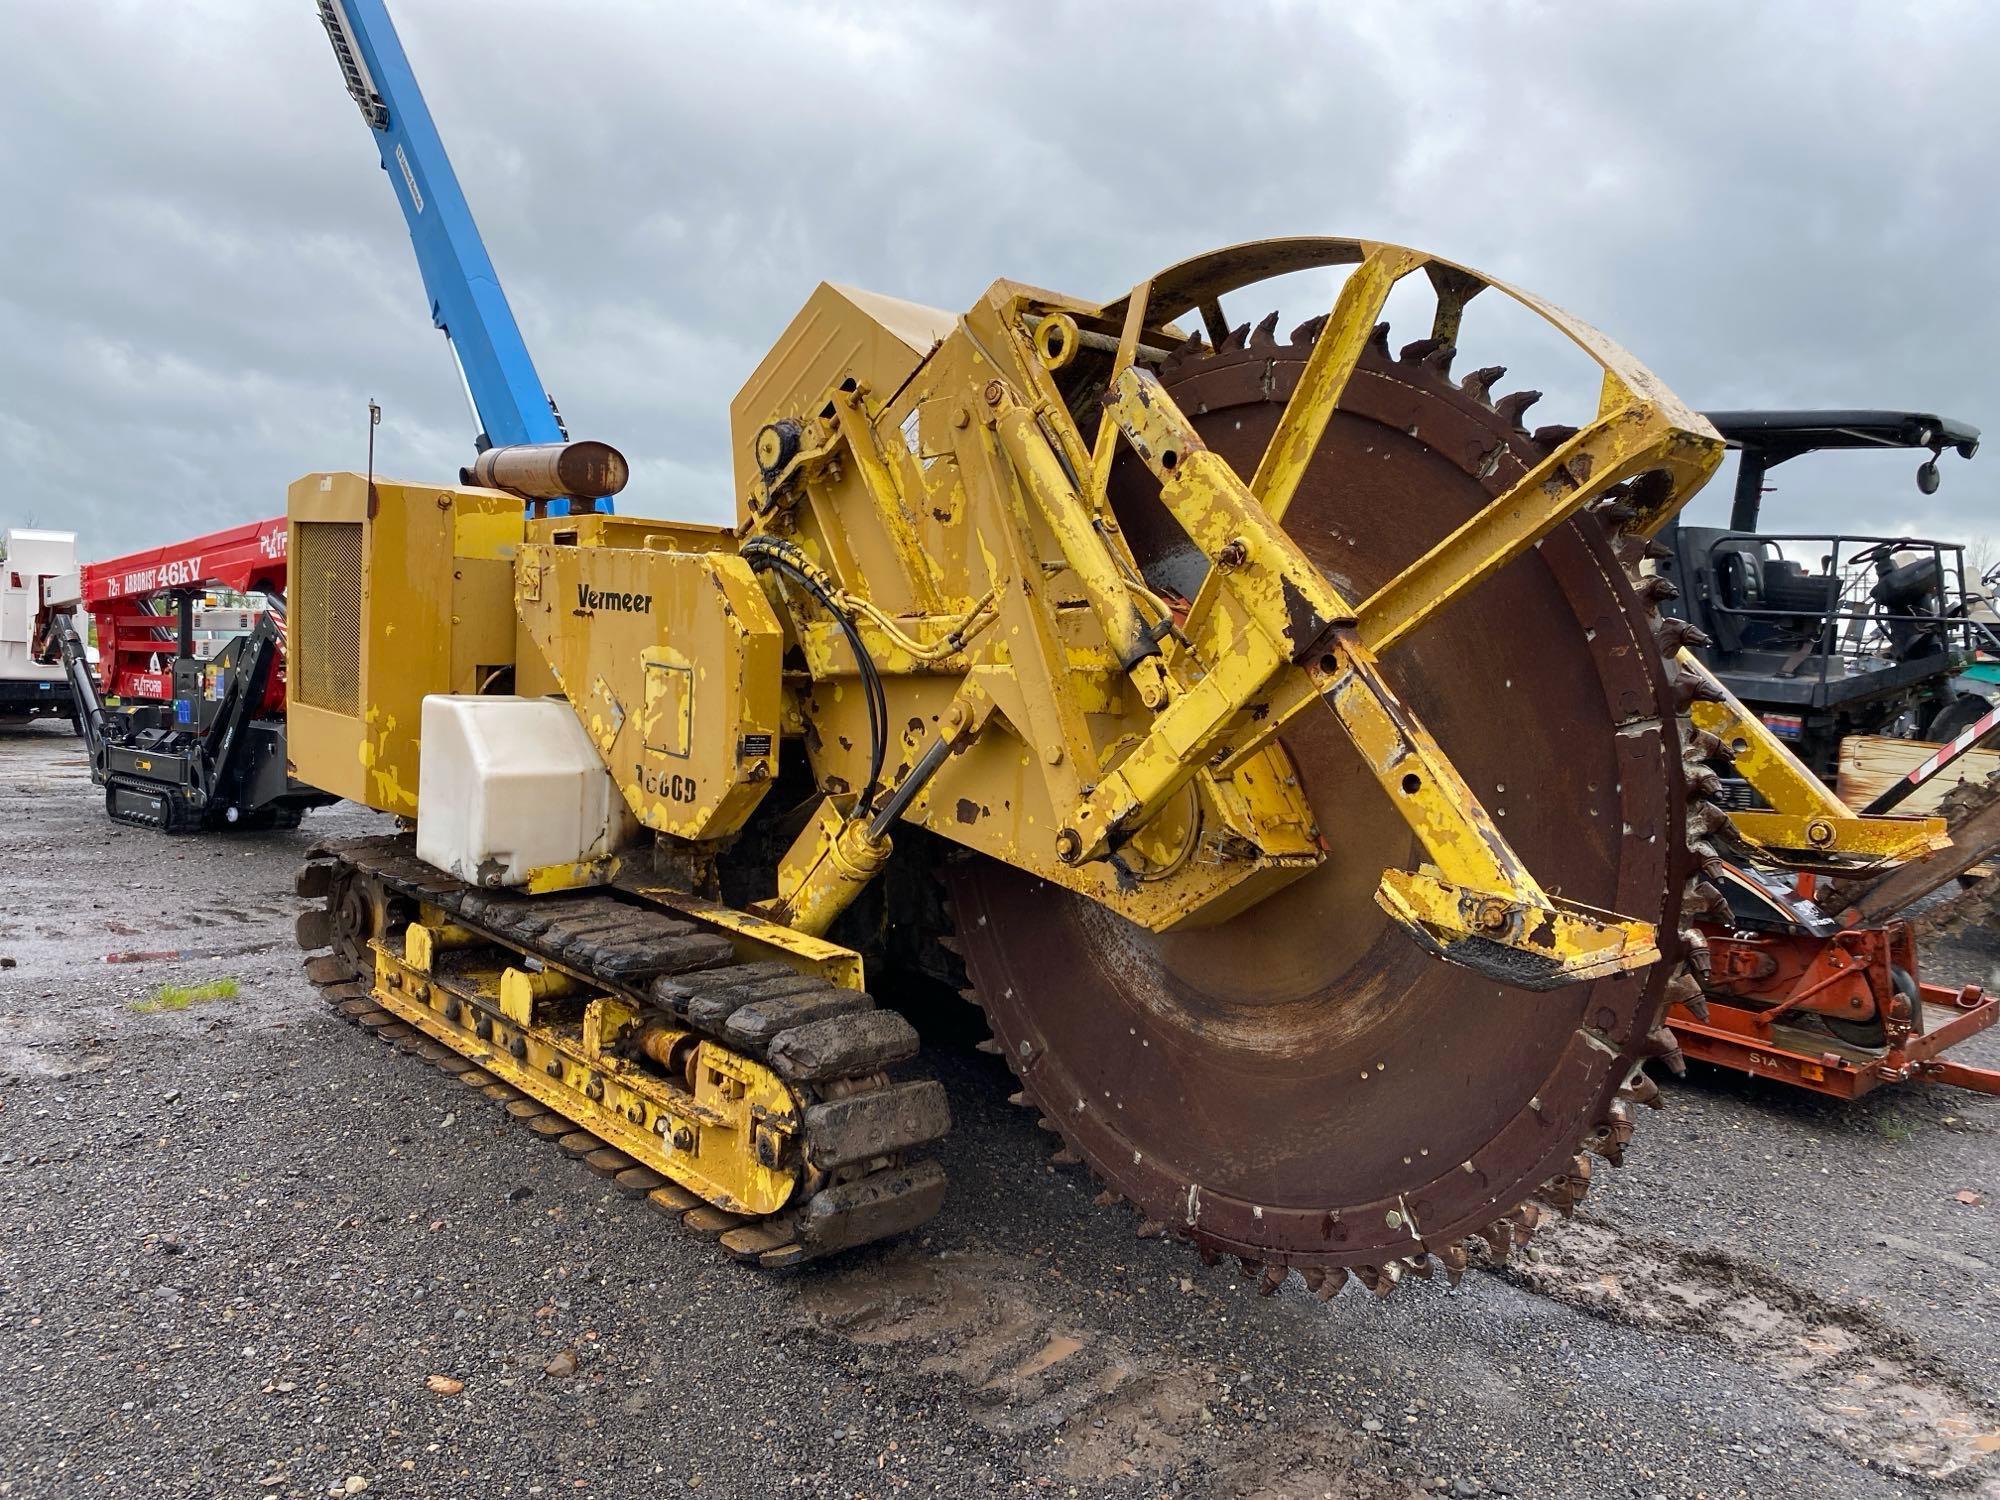 VERMEER T600D ROCK SAW SN-000567 powered by Detroit diesel engine, equipped with CRC cutter wheel